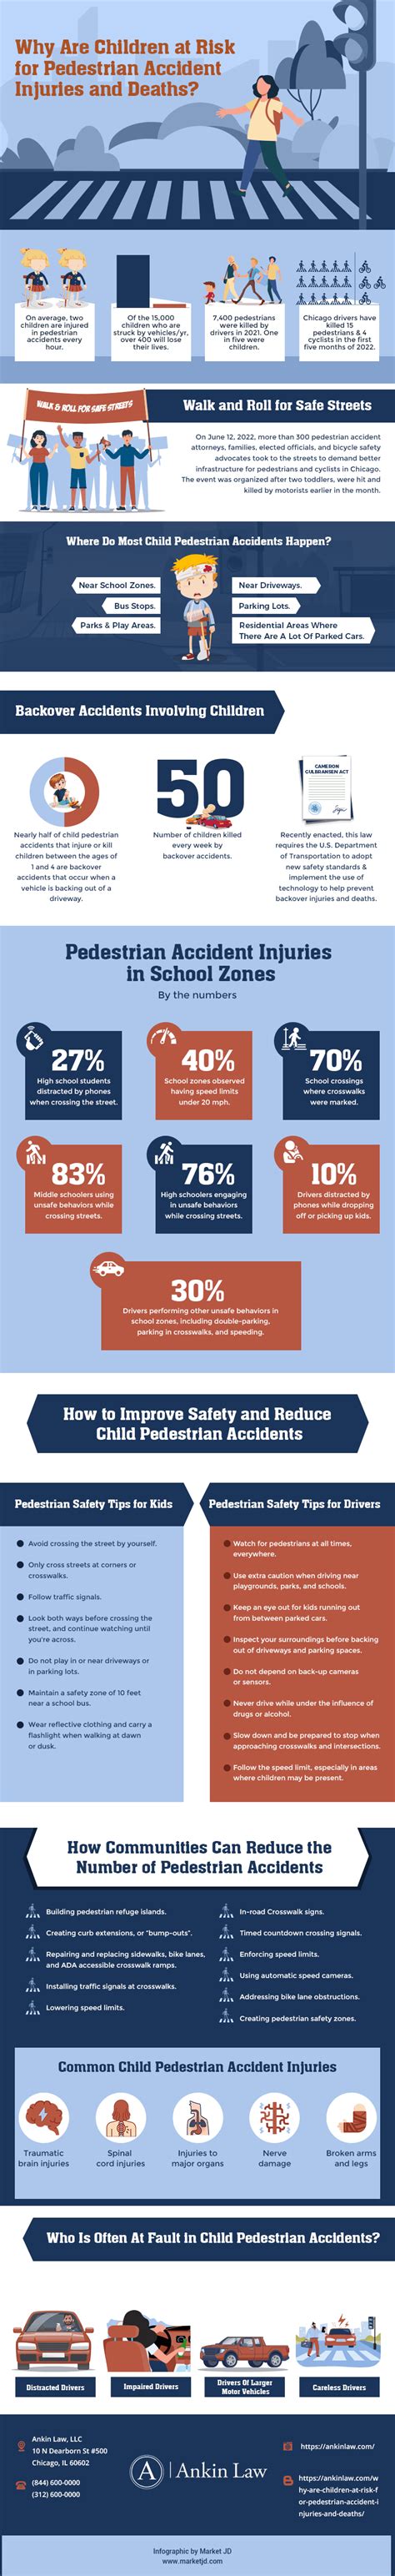 Why are children at risk on the road?